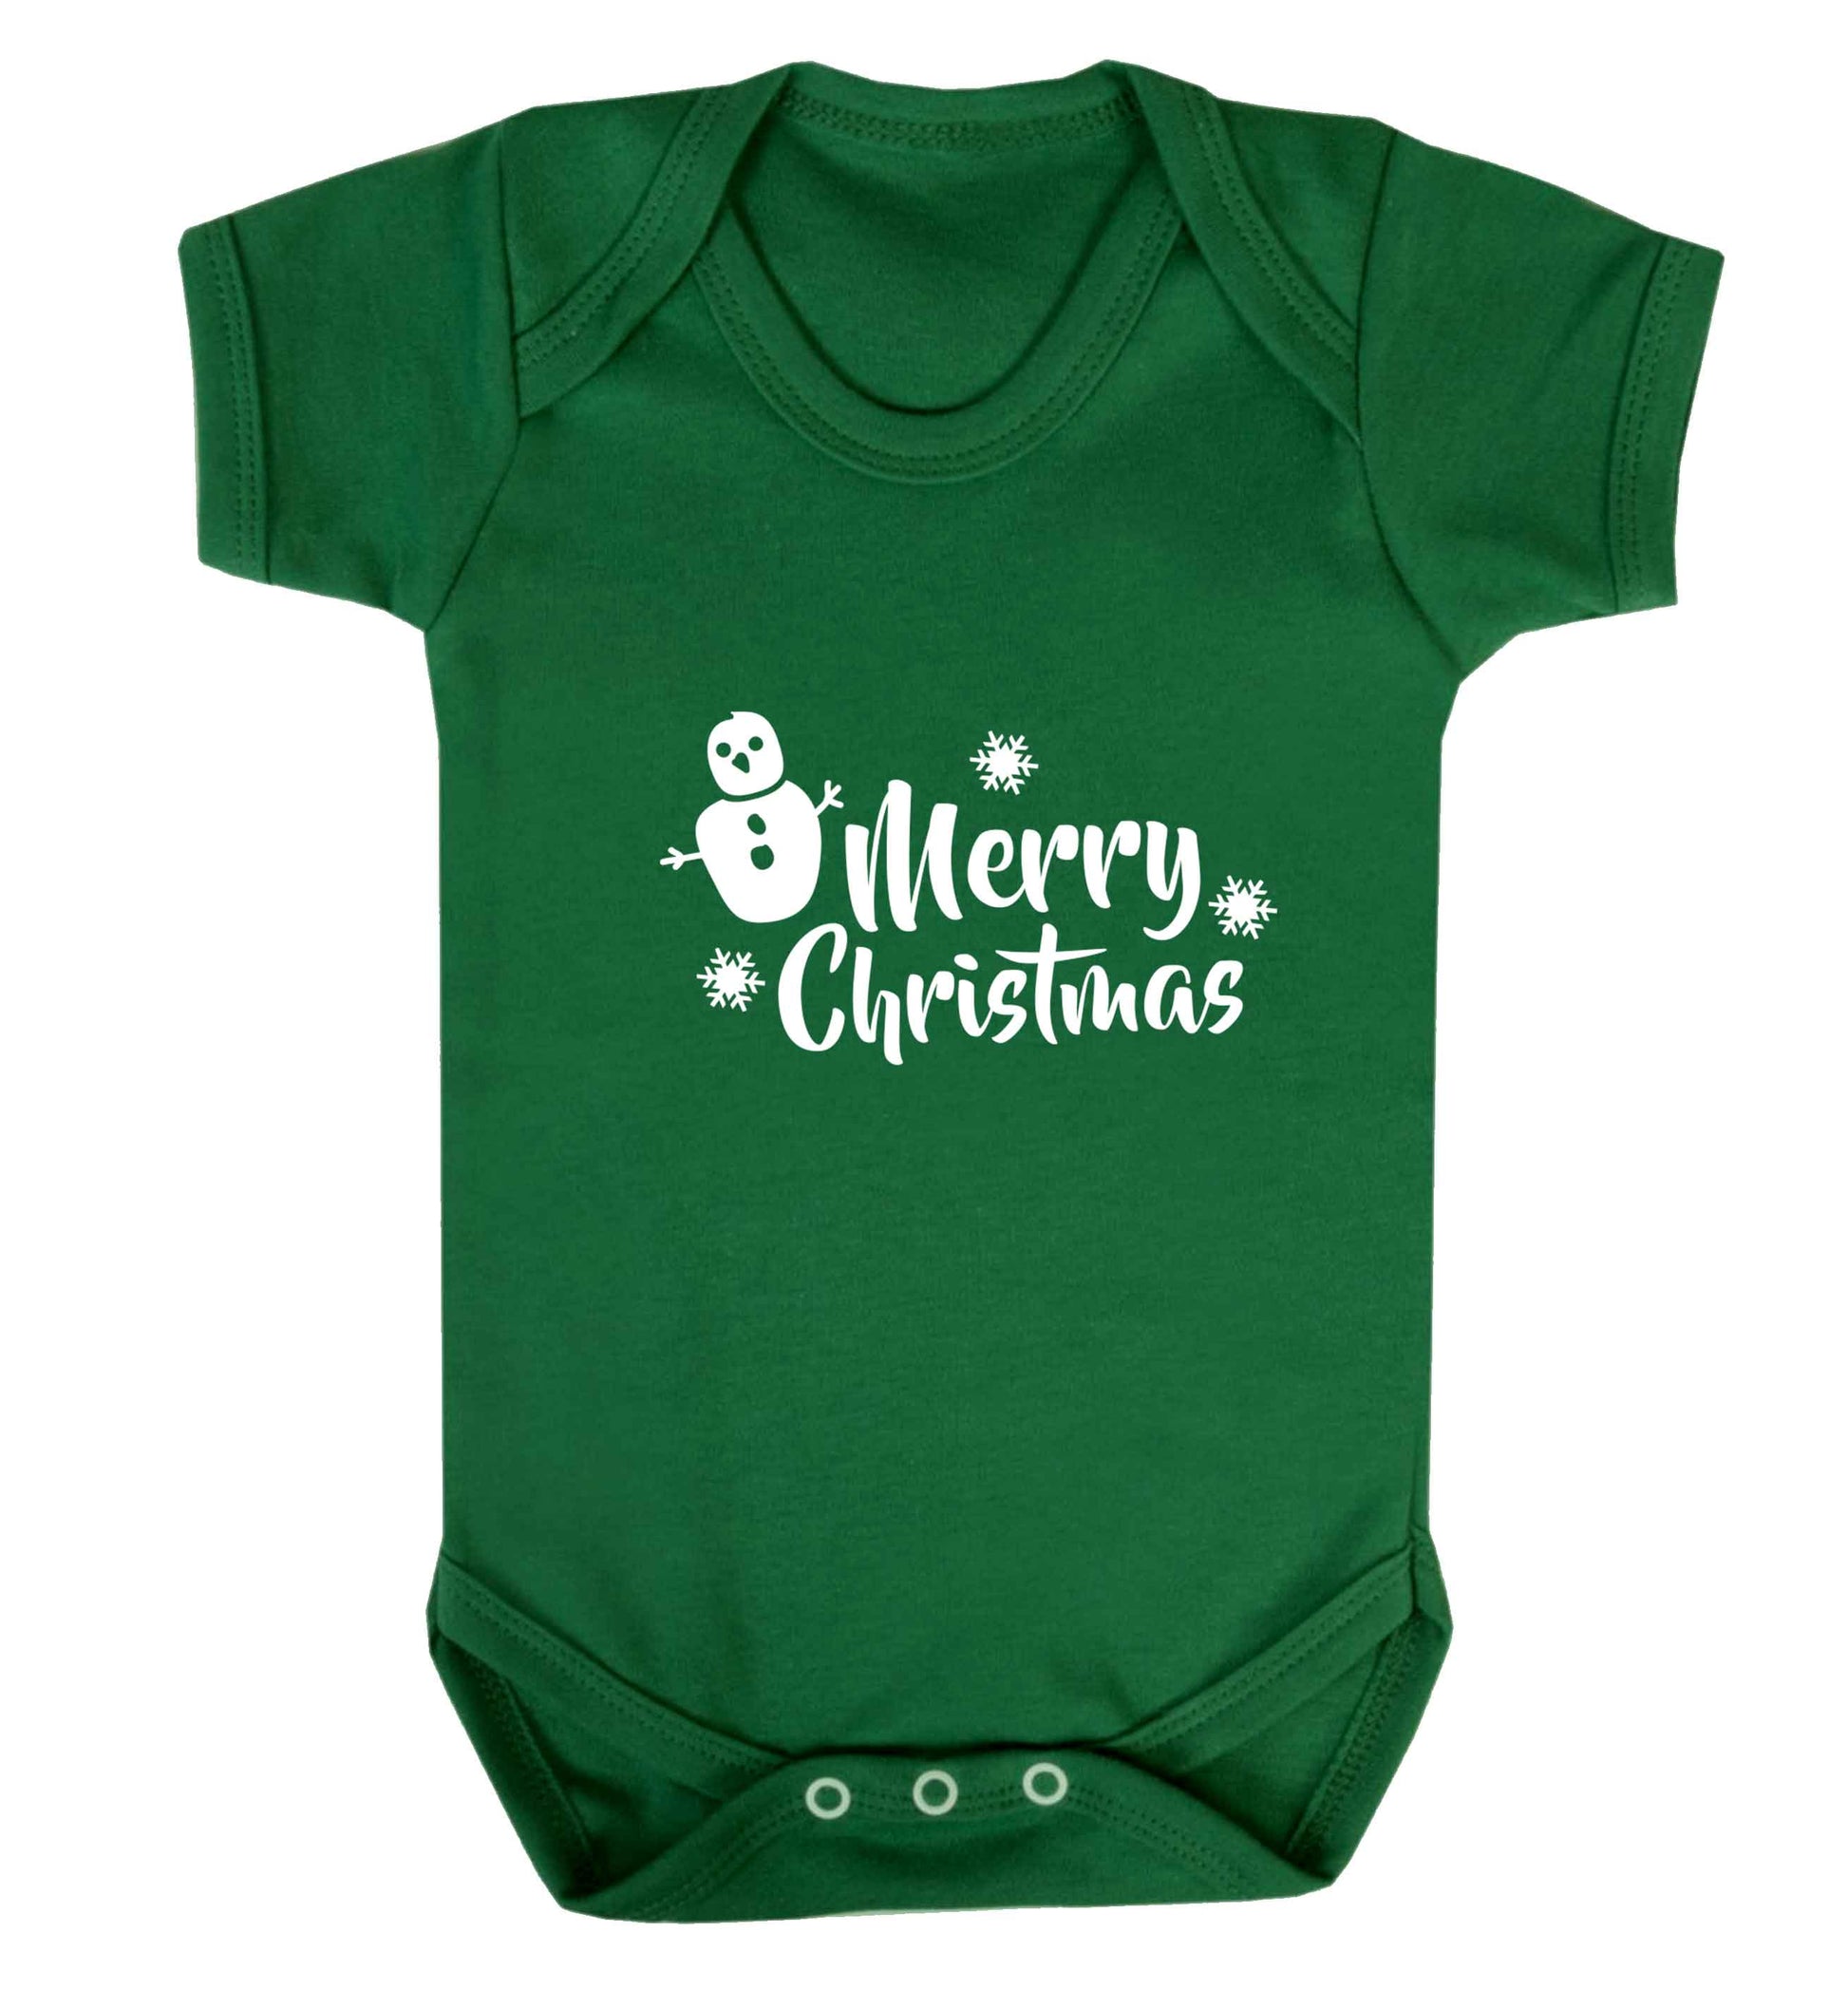 Merry Christmas - snowman baby vest green 18-24 months